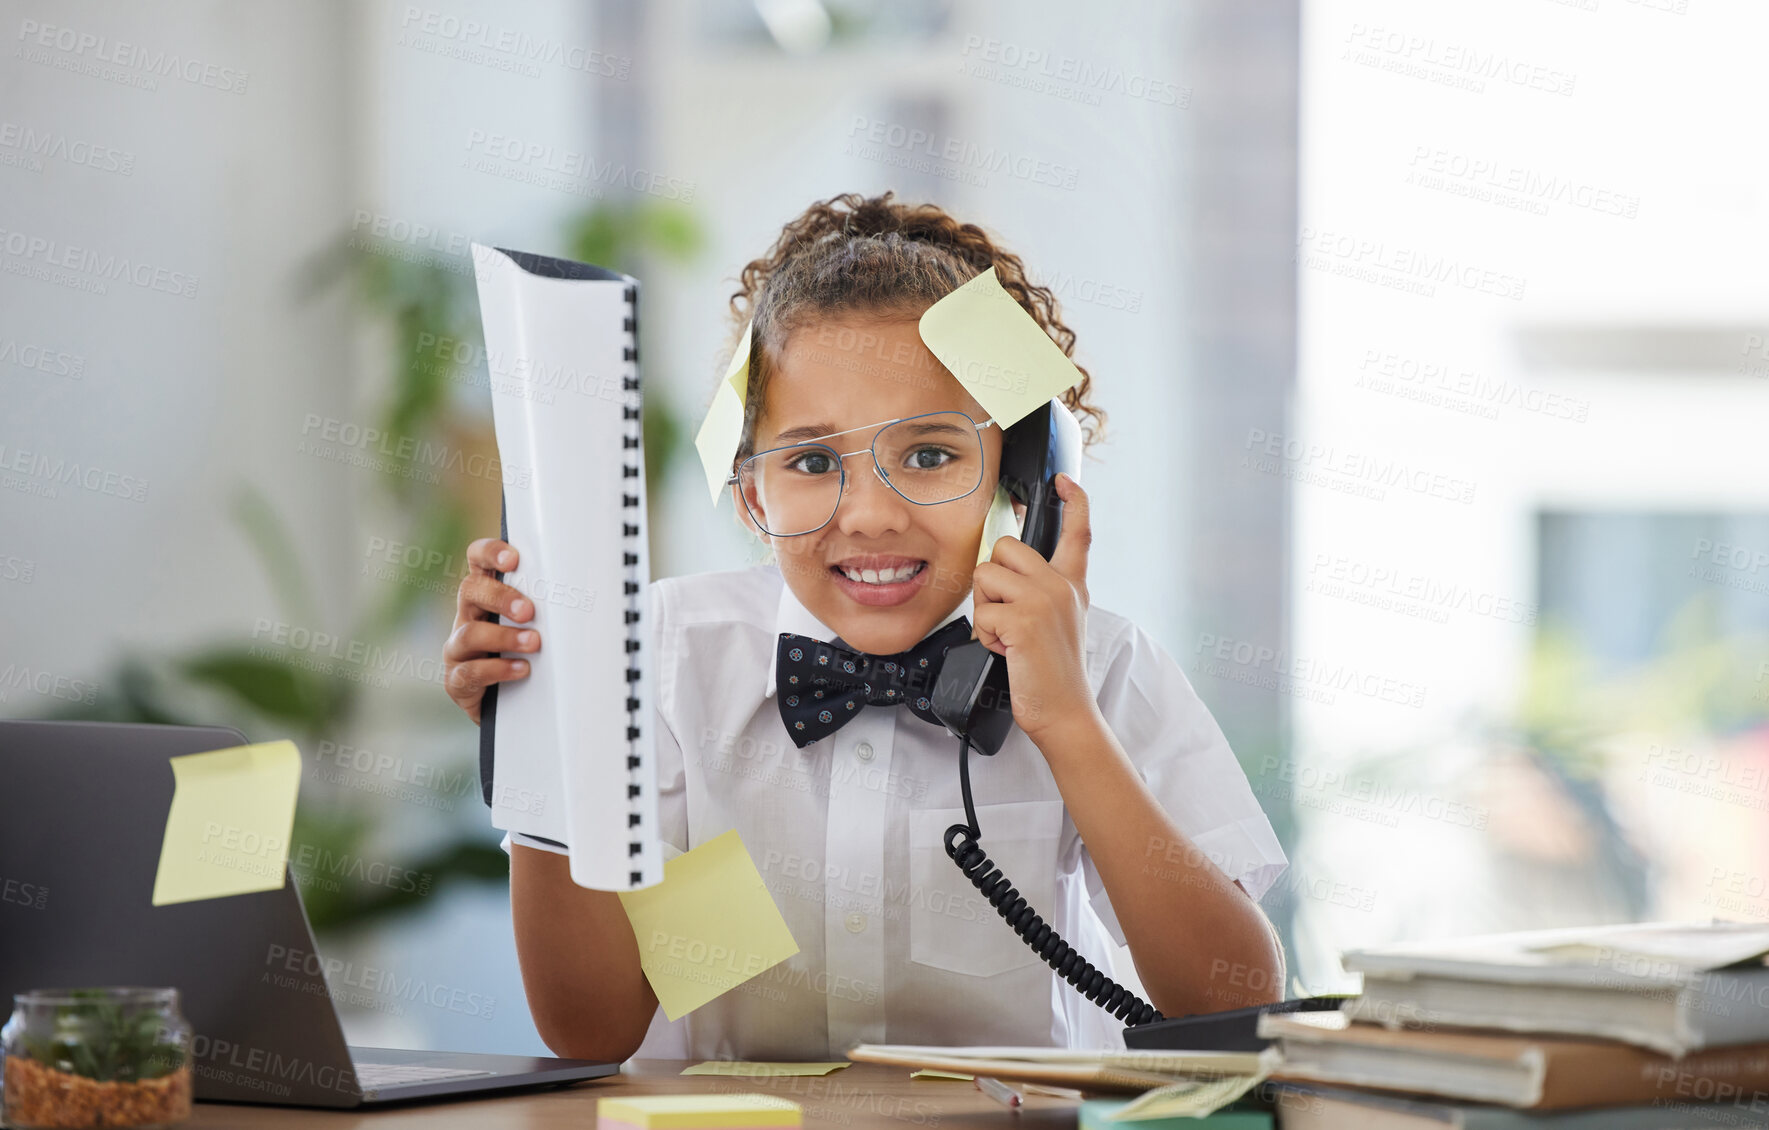 Buy stock photo Telephone, stress and child boss in the office with sticky notes and anxious, annoyed and upset face. Frustration, landline and girl kid ceo on a phone call by the desk working in a modern workplace.